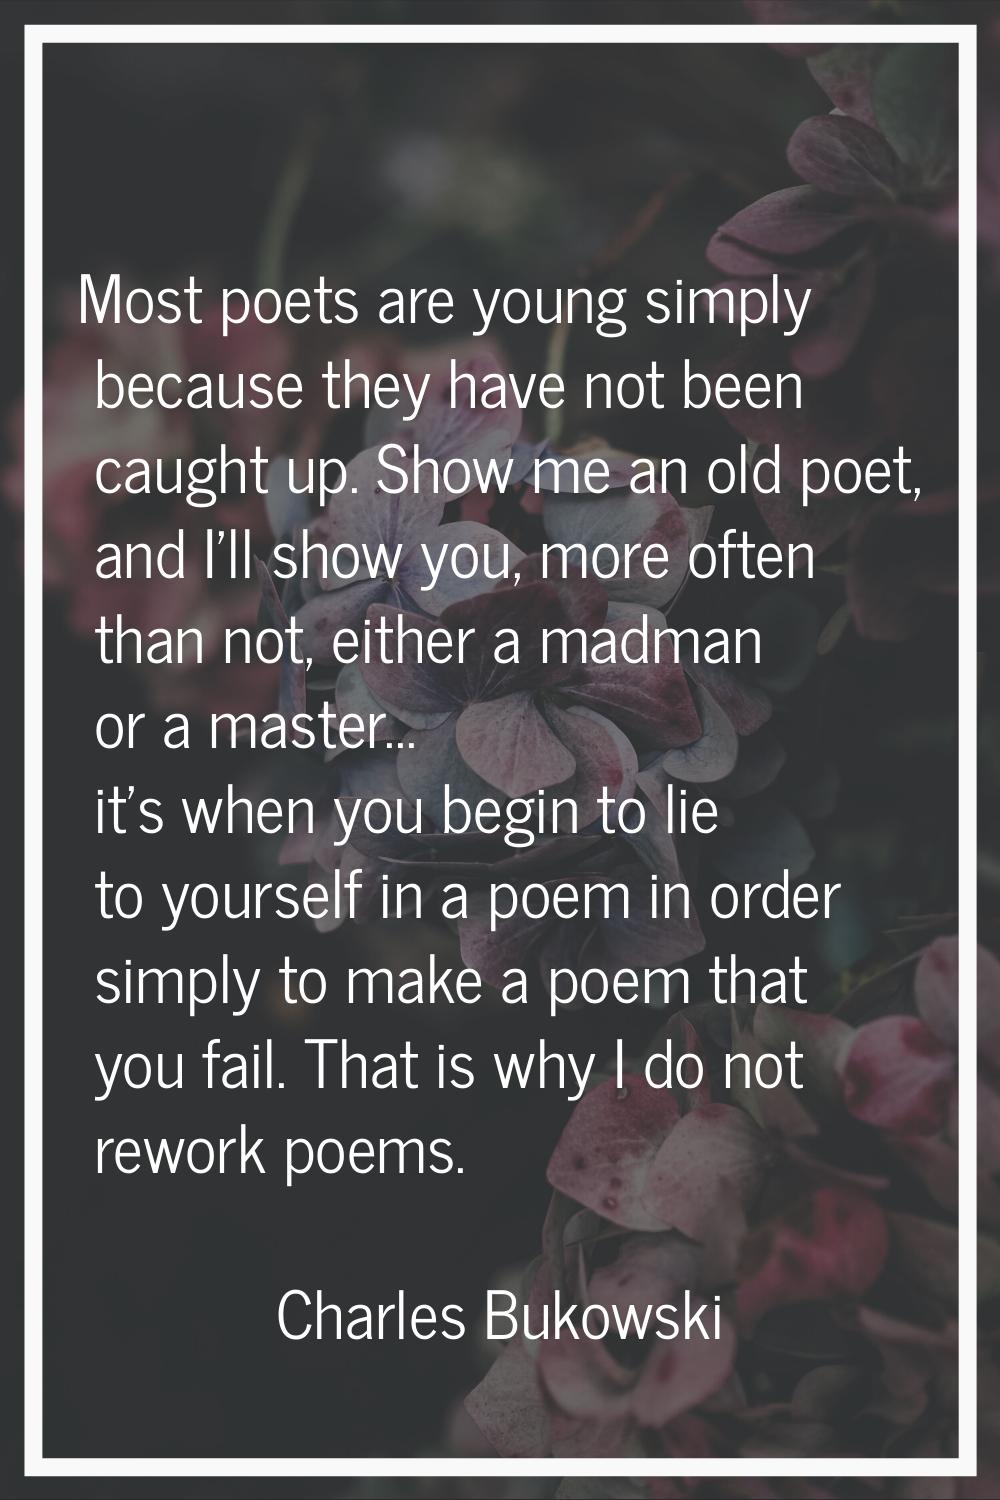 Most poets are young simply because they have not been caught up. Show me an old poet, and I'll sho